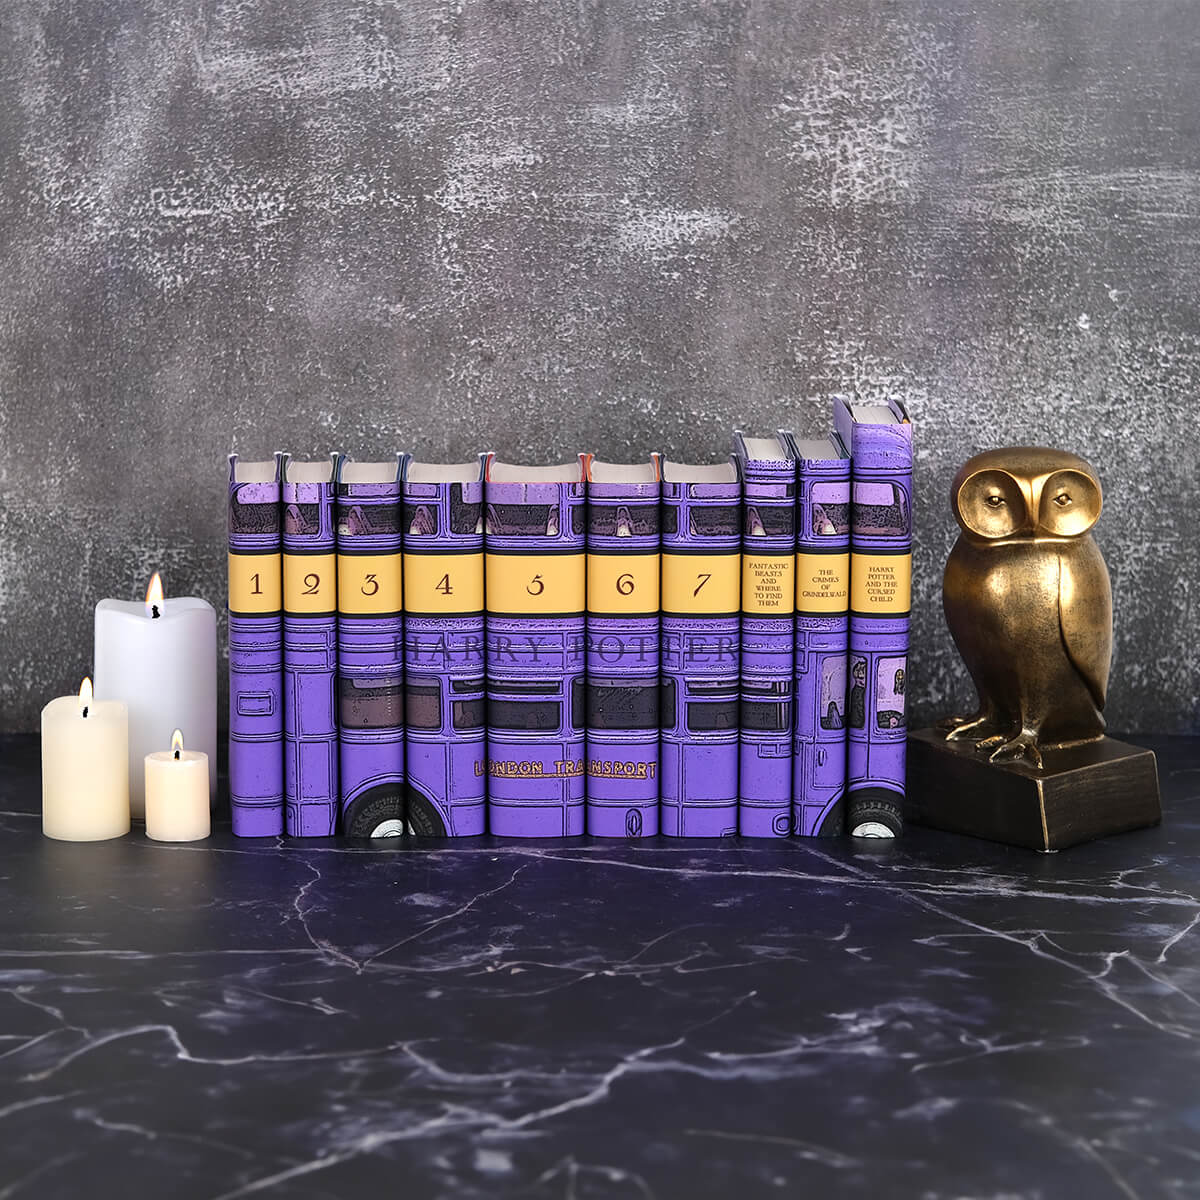 Install shot of Harry Potter Bus Set against a grey stone background surrounded by candles and a gold owl statue.